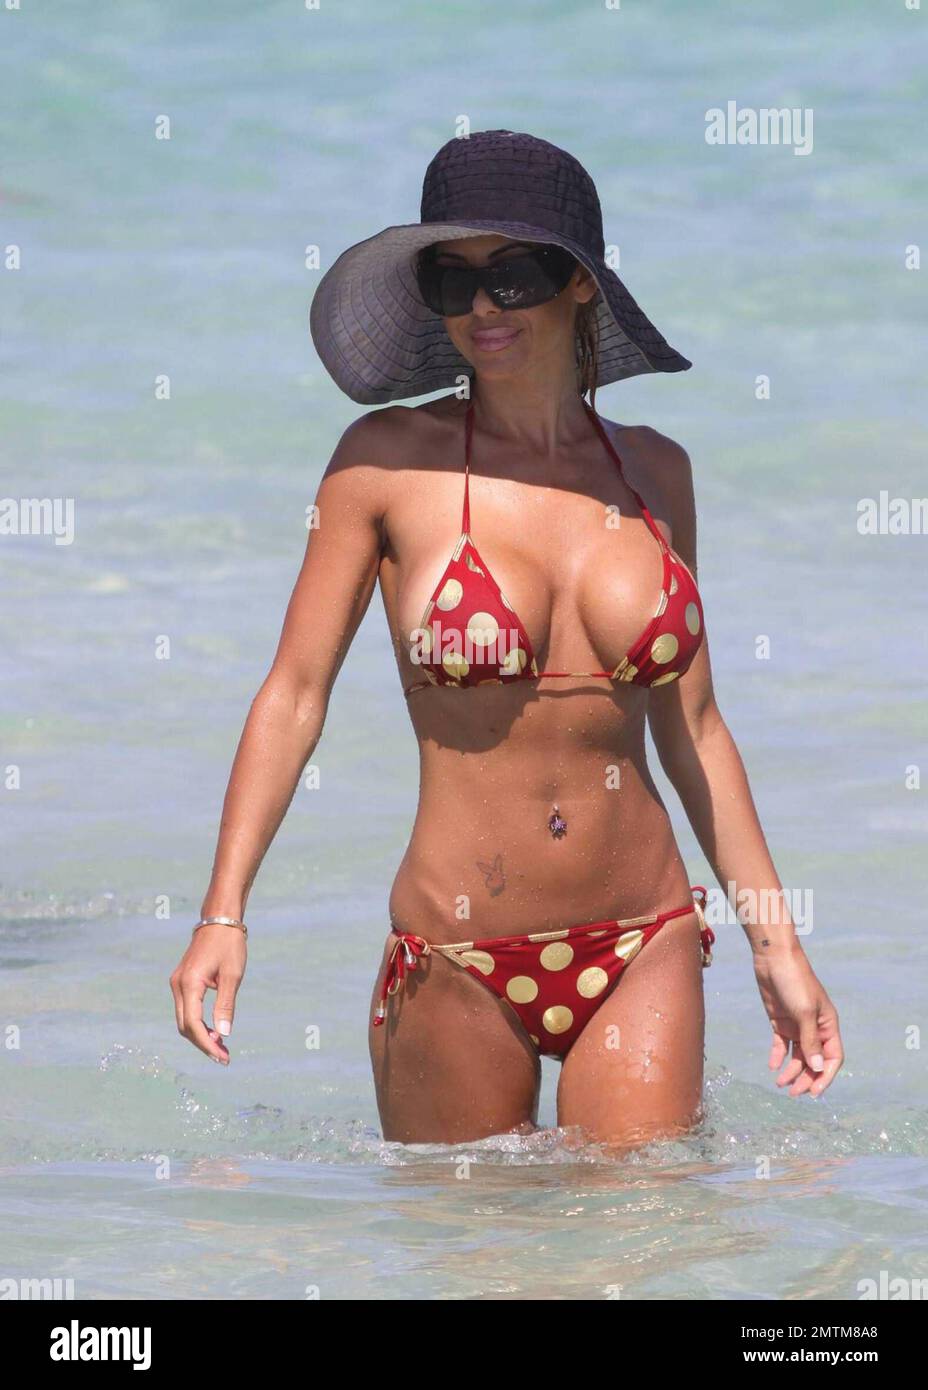 Playboy Playmate Shauna Sand spends the day on Miami Beach with her new  beau. After a quick bikini change for Shauna, the couple swam in the warm  ocean and shared some tender